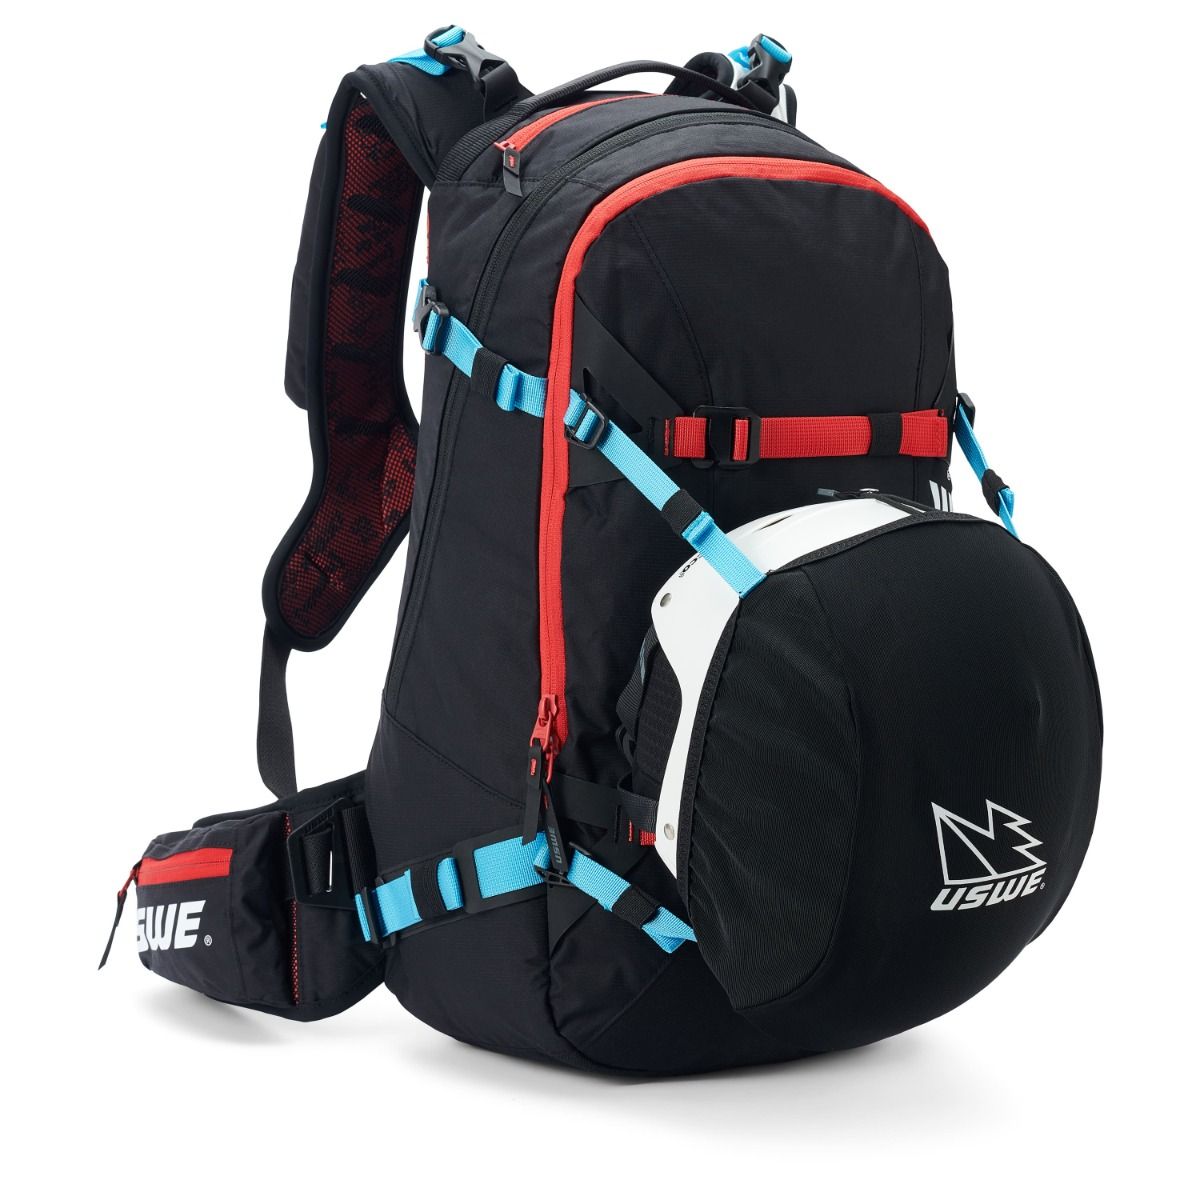 Mochila Uswe Flow 16l Mtb Protector Pack Blk/red